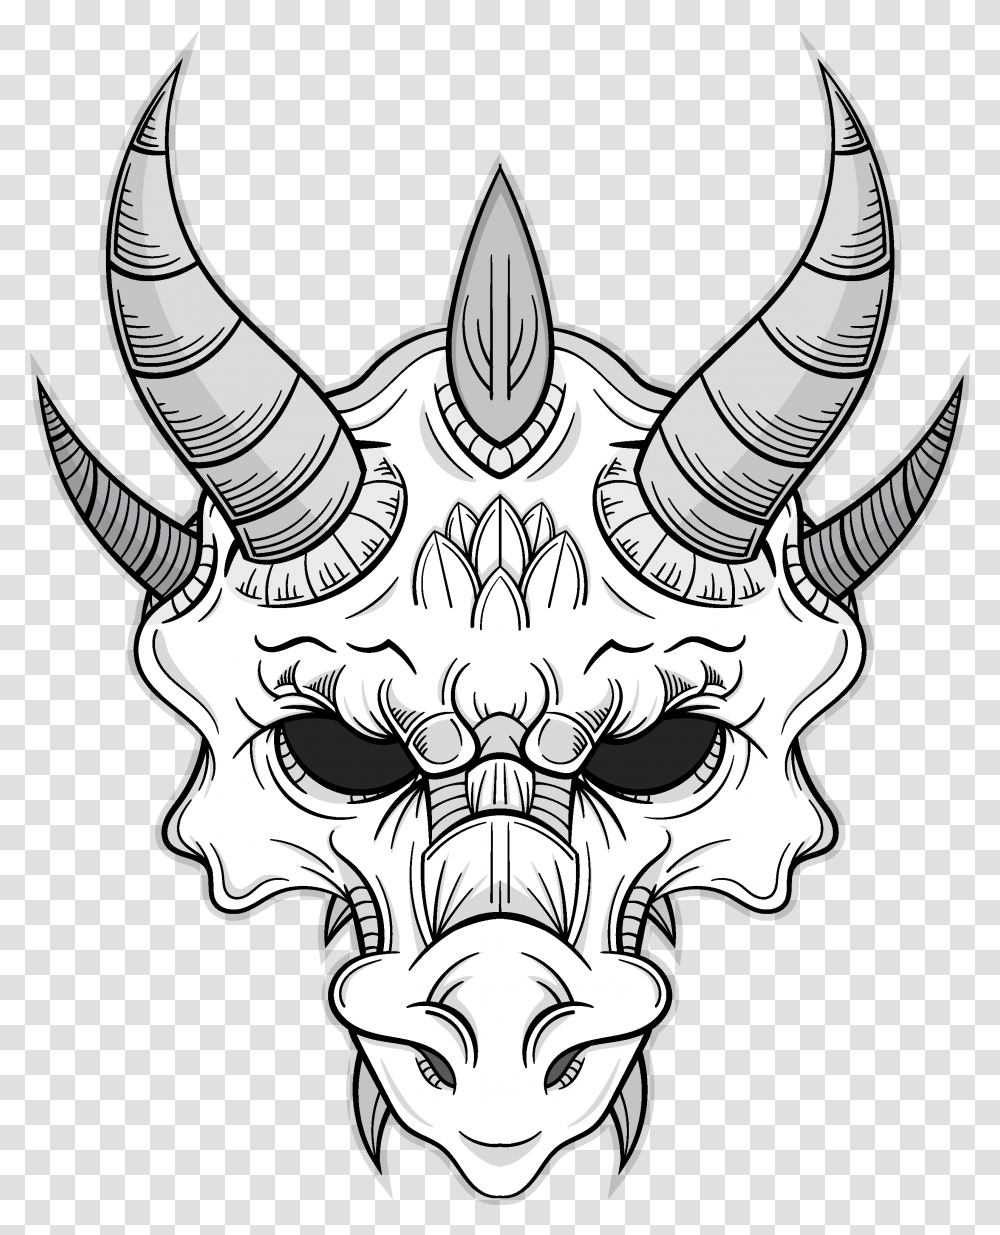 Dragon Skull Collections Drawing Of A Dragon Skull, Architecture, Building, Art, Statue Transparent Png